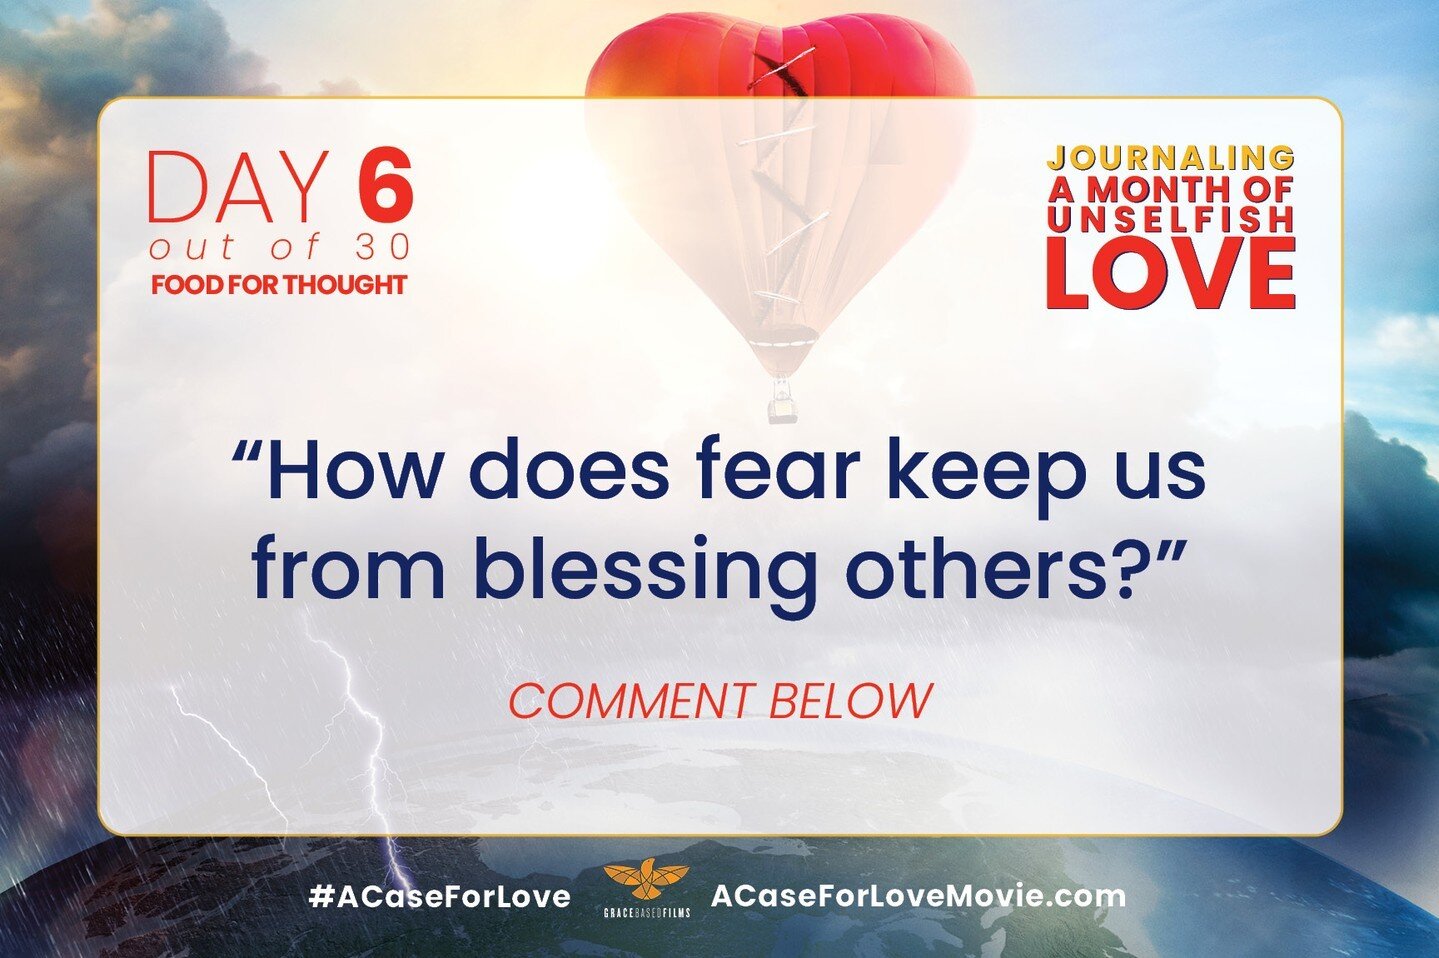 DAY 6 of A MONTH OF UNSELFISH LOVE!  Each day we'll be posting that day's &quot;Food for Thought&quot; (FOT) as is listed in the Unselfish Love Journal, found here: https://acaseforlovemovie.pulse.ly/tzylvcscob. As each of us begins to cultivate the 